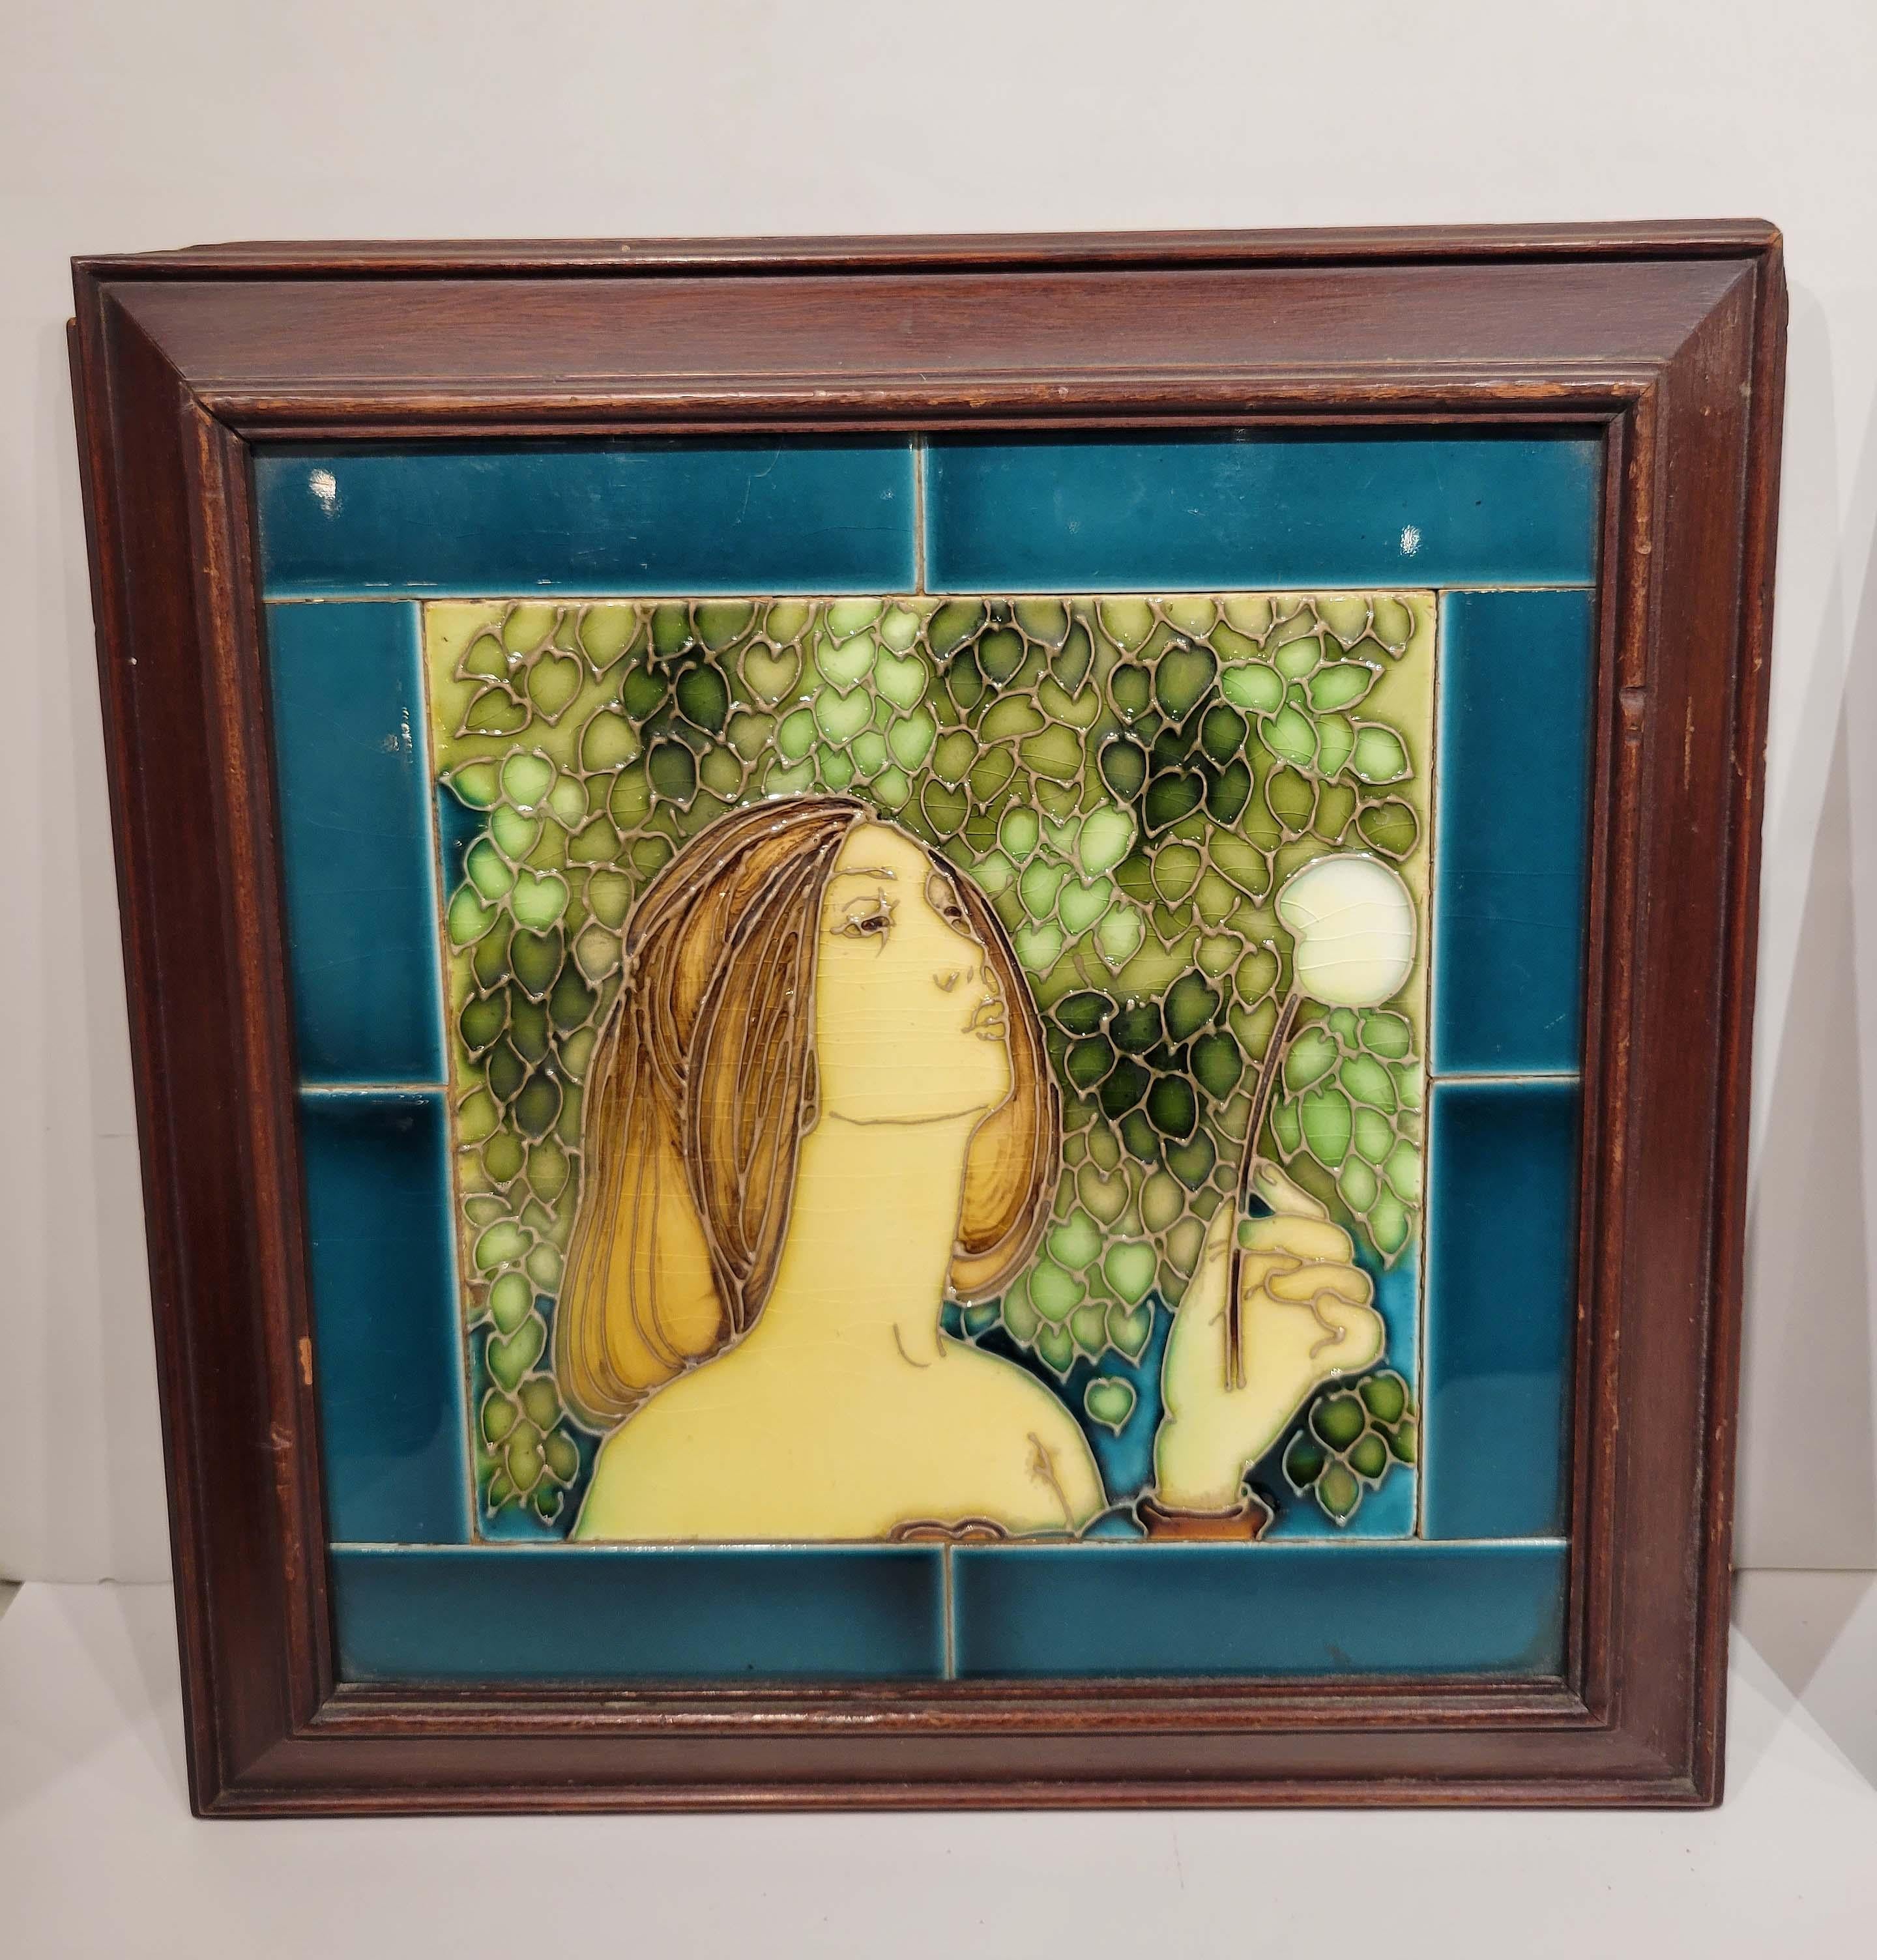 This pair of English ceramic tiles each depicting a beautiful maiden blowing on what it seems to be dandelions are framed in their original frames and date to the end of 19th century.
We have not opened the back to see if there are any marking on